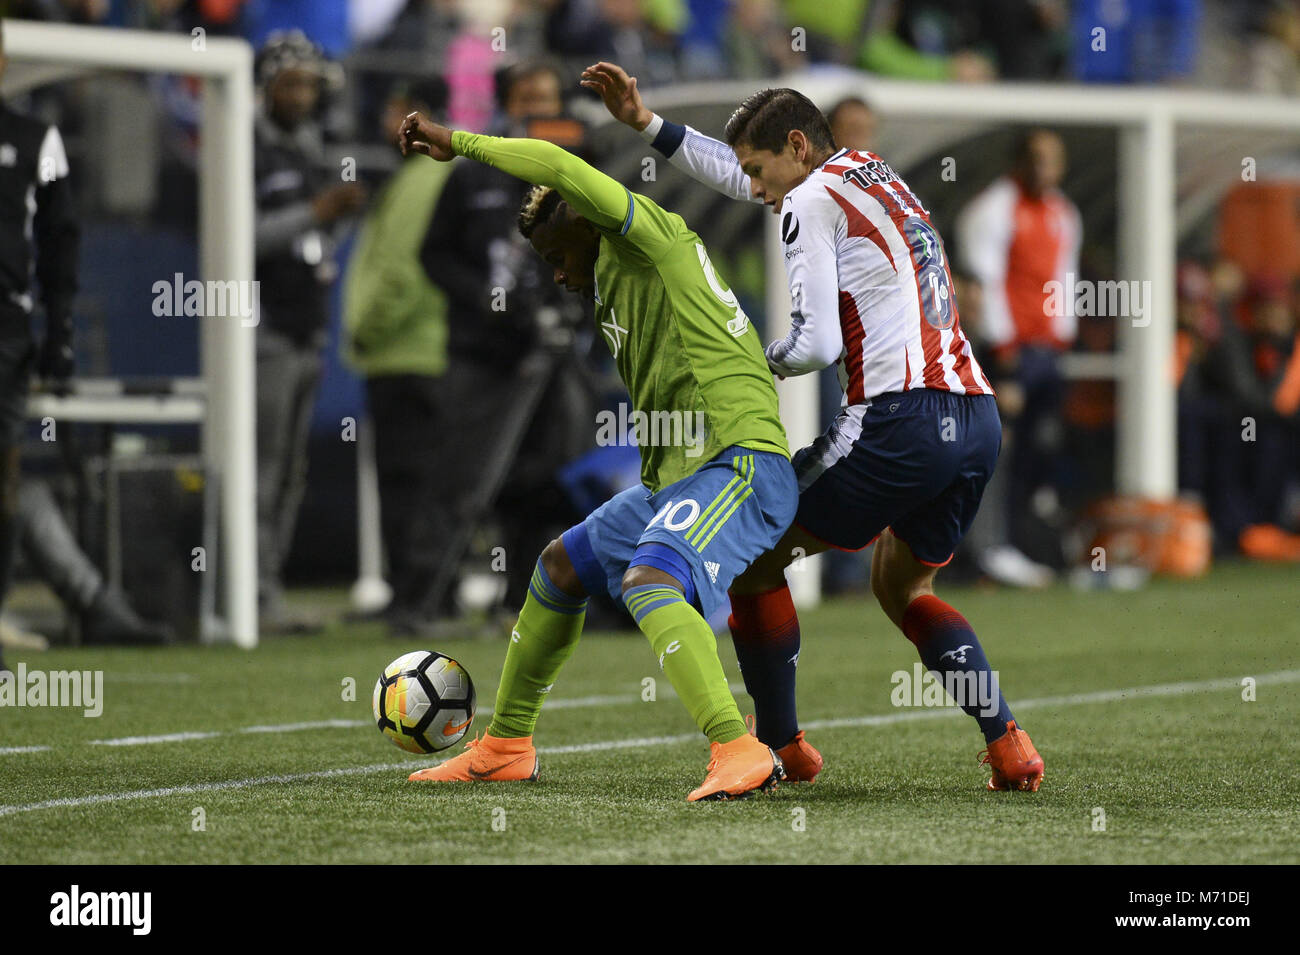 Seattle, Washington, USA. 7th Mar, 2018. CONCACAF Soccer 2018: JESUS GODINEZ (89) defends against WAYLON FRANCIS (90) as Chivas Guadalajara visits the Seattle Sounders in a CONCACAF quarterfinal match at Century Link Field in Seattle, WA. Seattle won the match 1-0. Credit: Jeff Halstead/ZUMA Wire/Alamy Live News Stock Photo